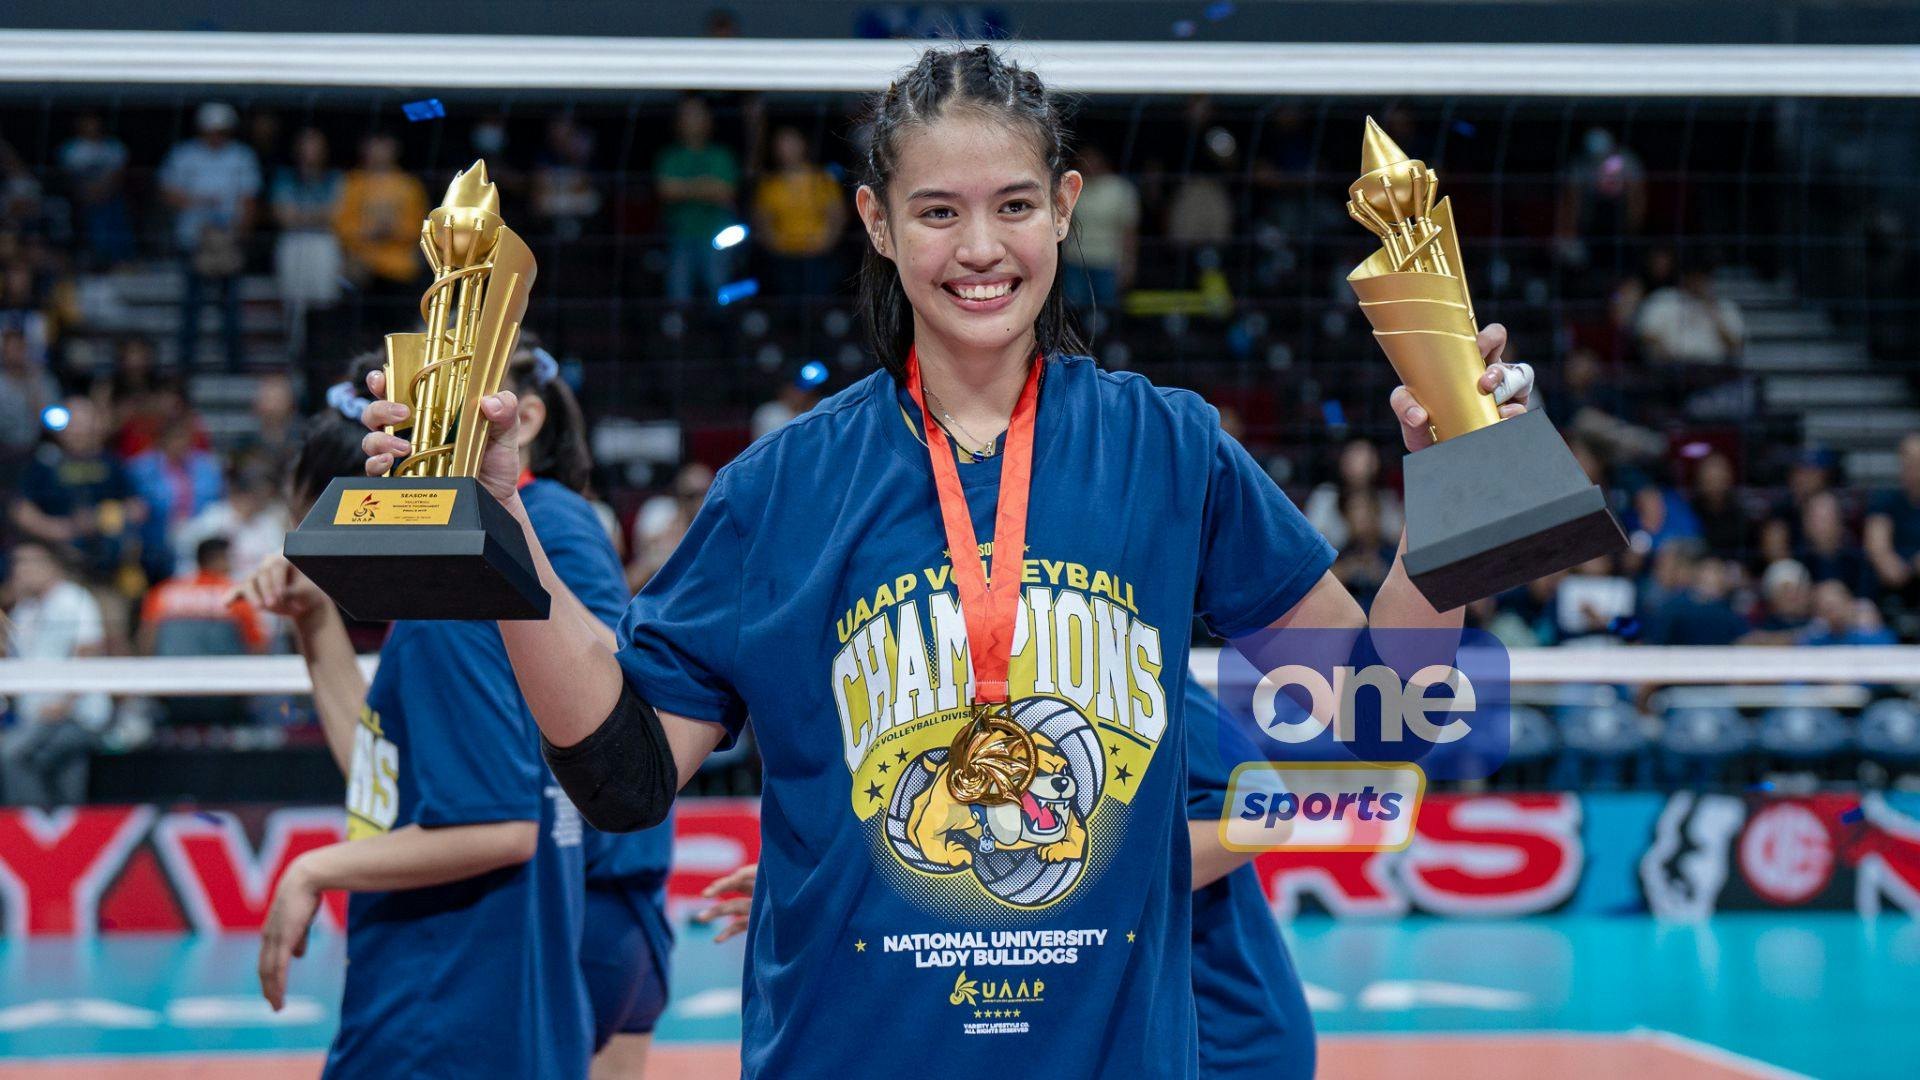 UAAP: Finals MVP Alyssa Solomon continues to live up to her dominant championship performances